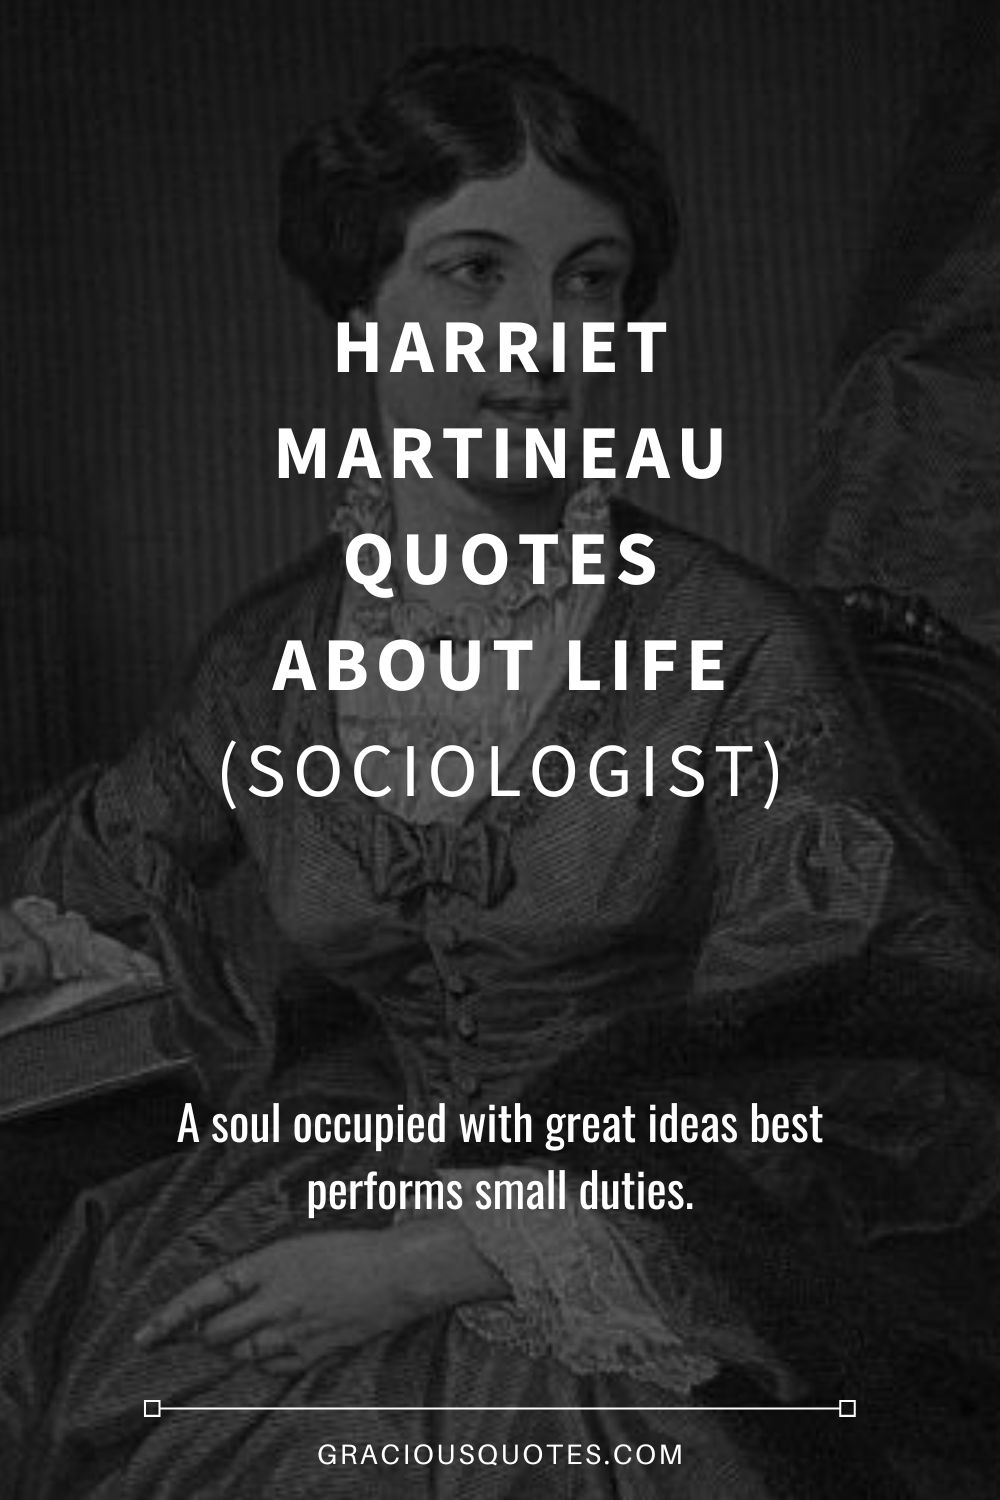 Harriet Martineau Quotes About Life (SOCIOLOGIST) - Gracious Quotes